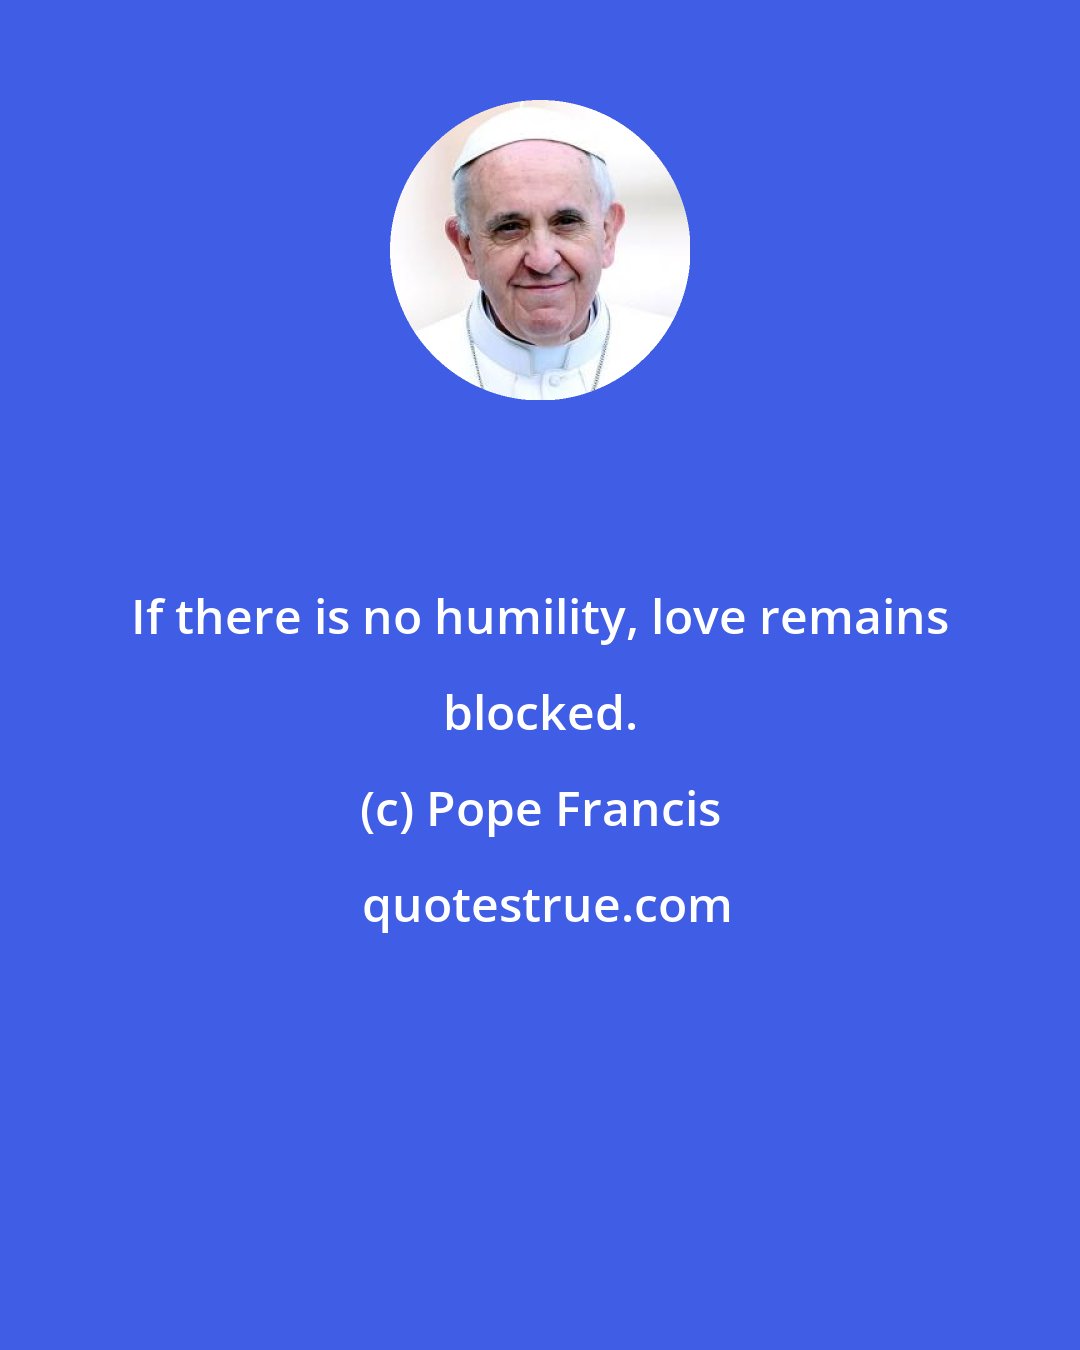 Pope Francis: If there is no humility, love remains blocked.